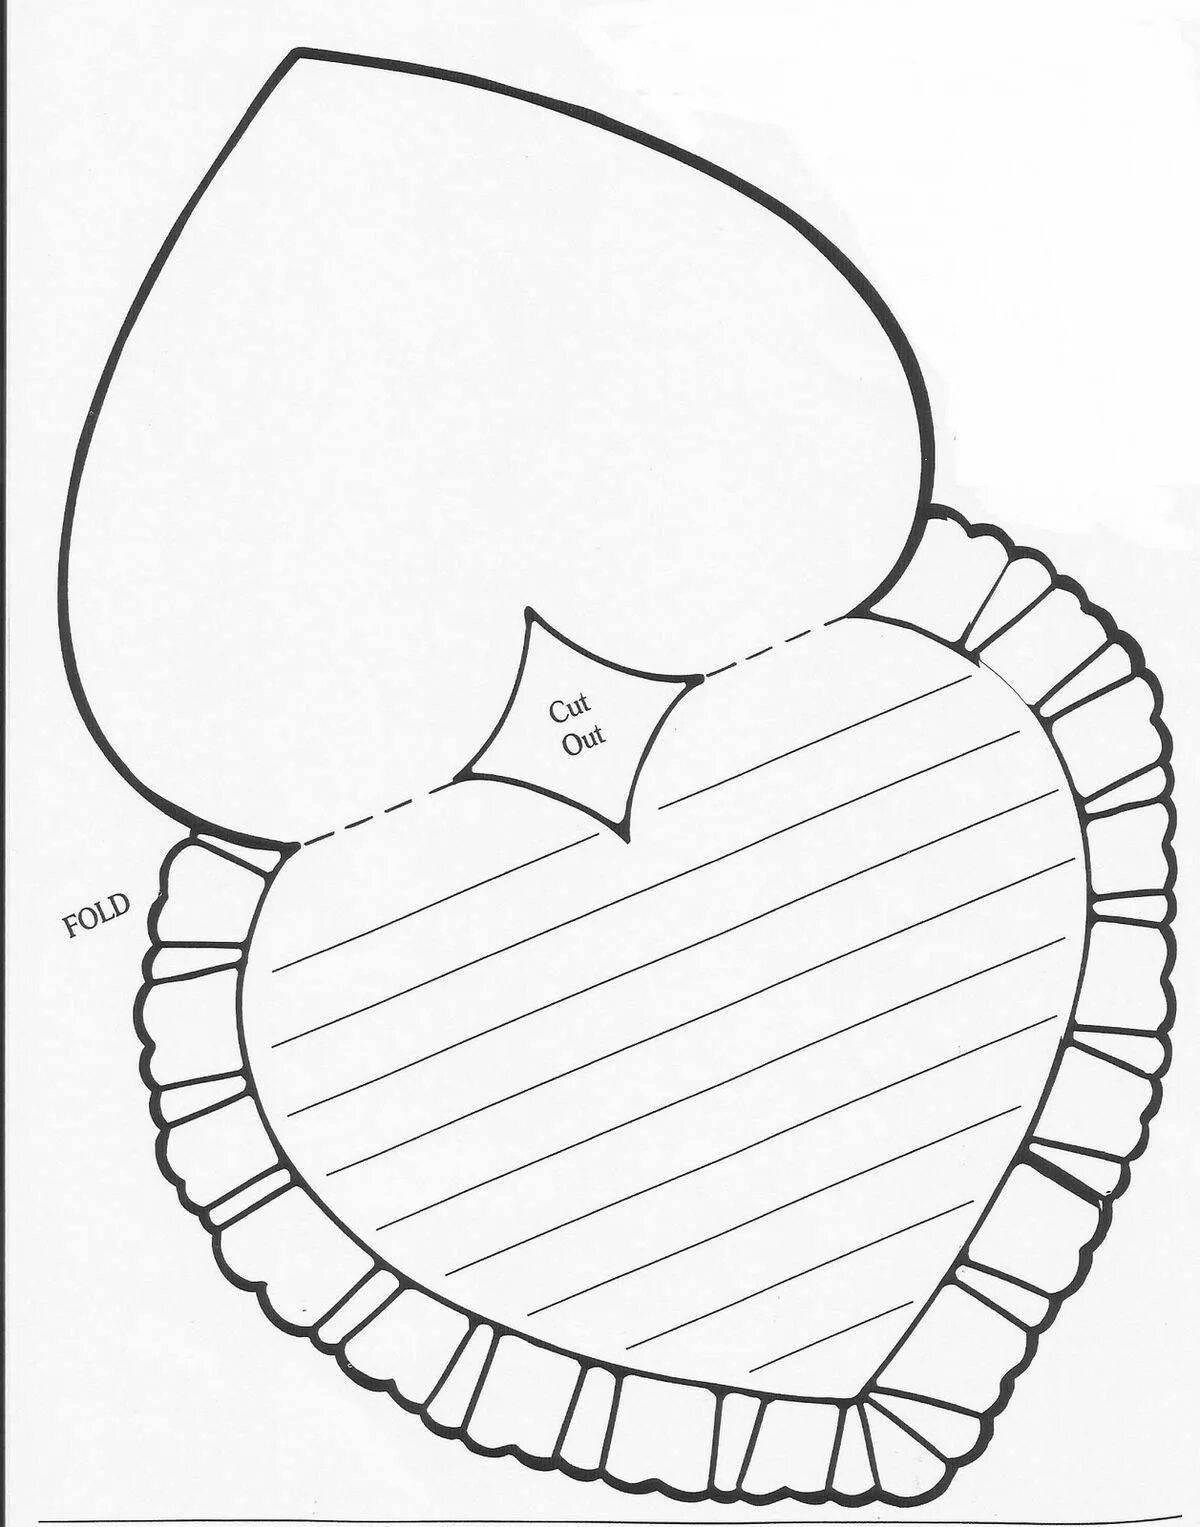 Dazzling card heart coloring page